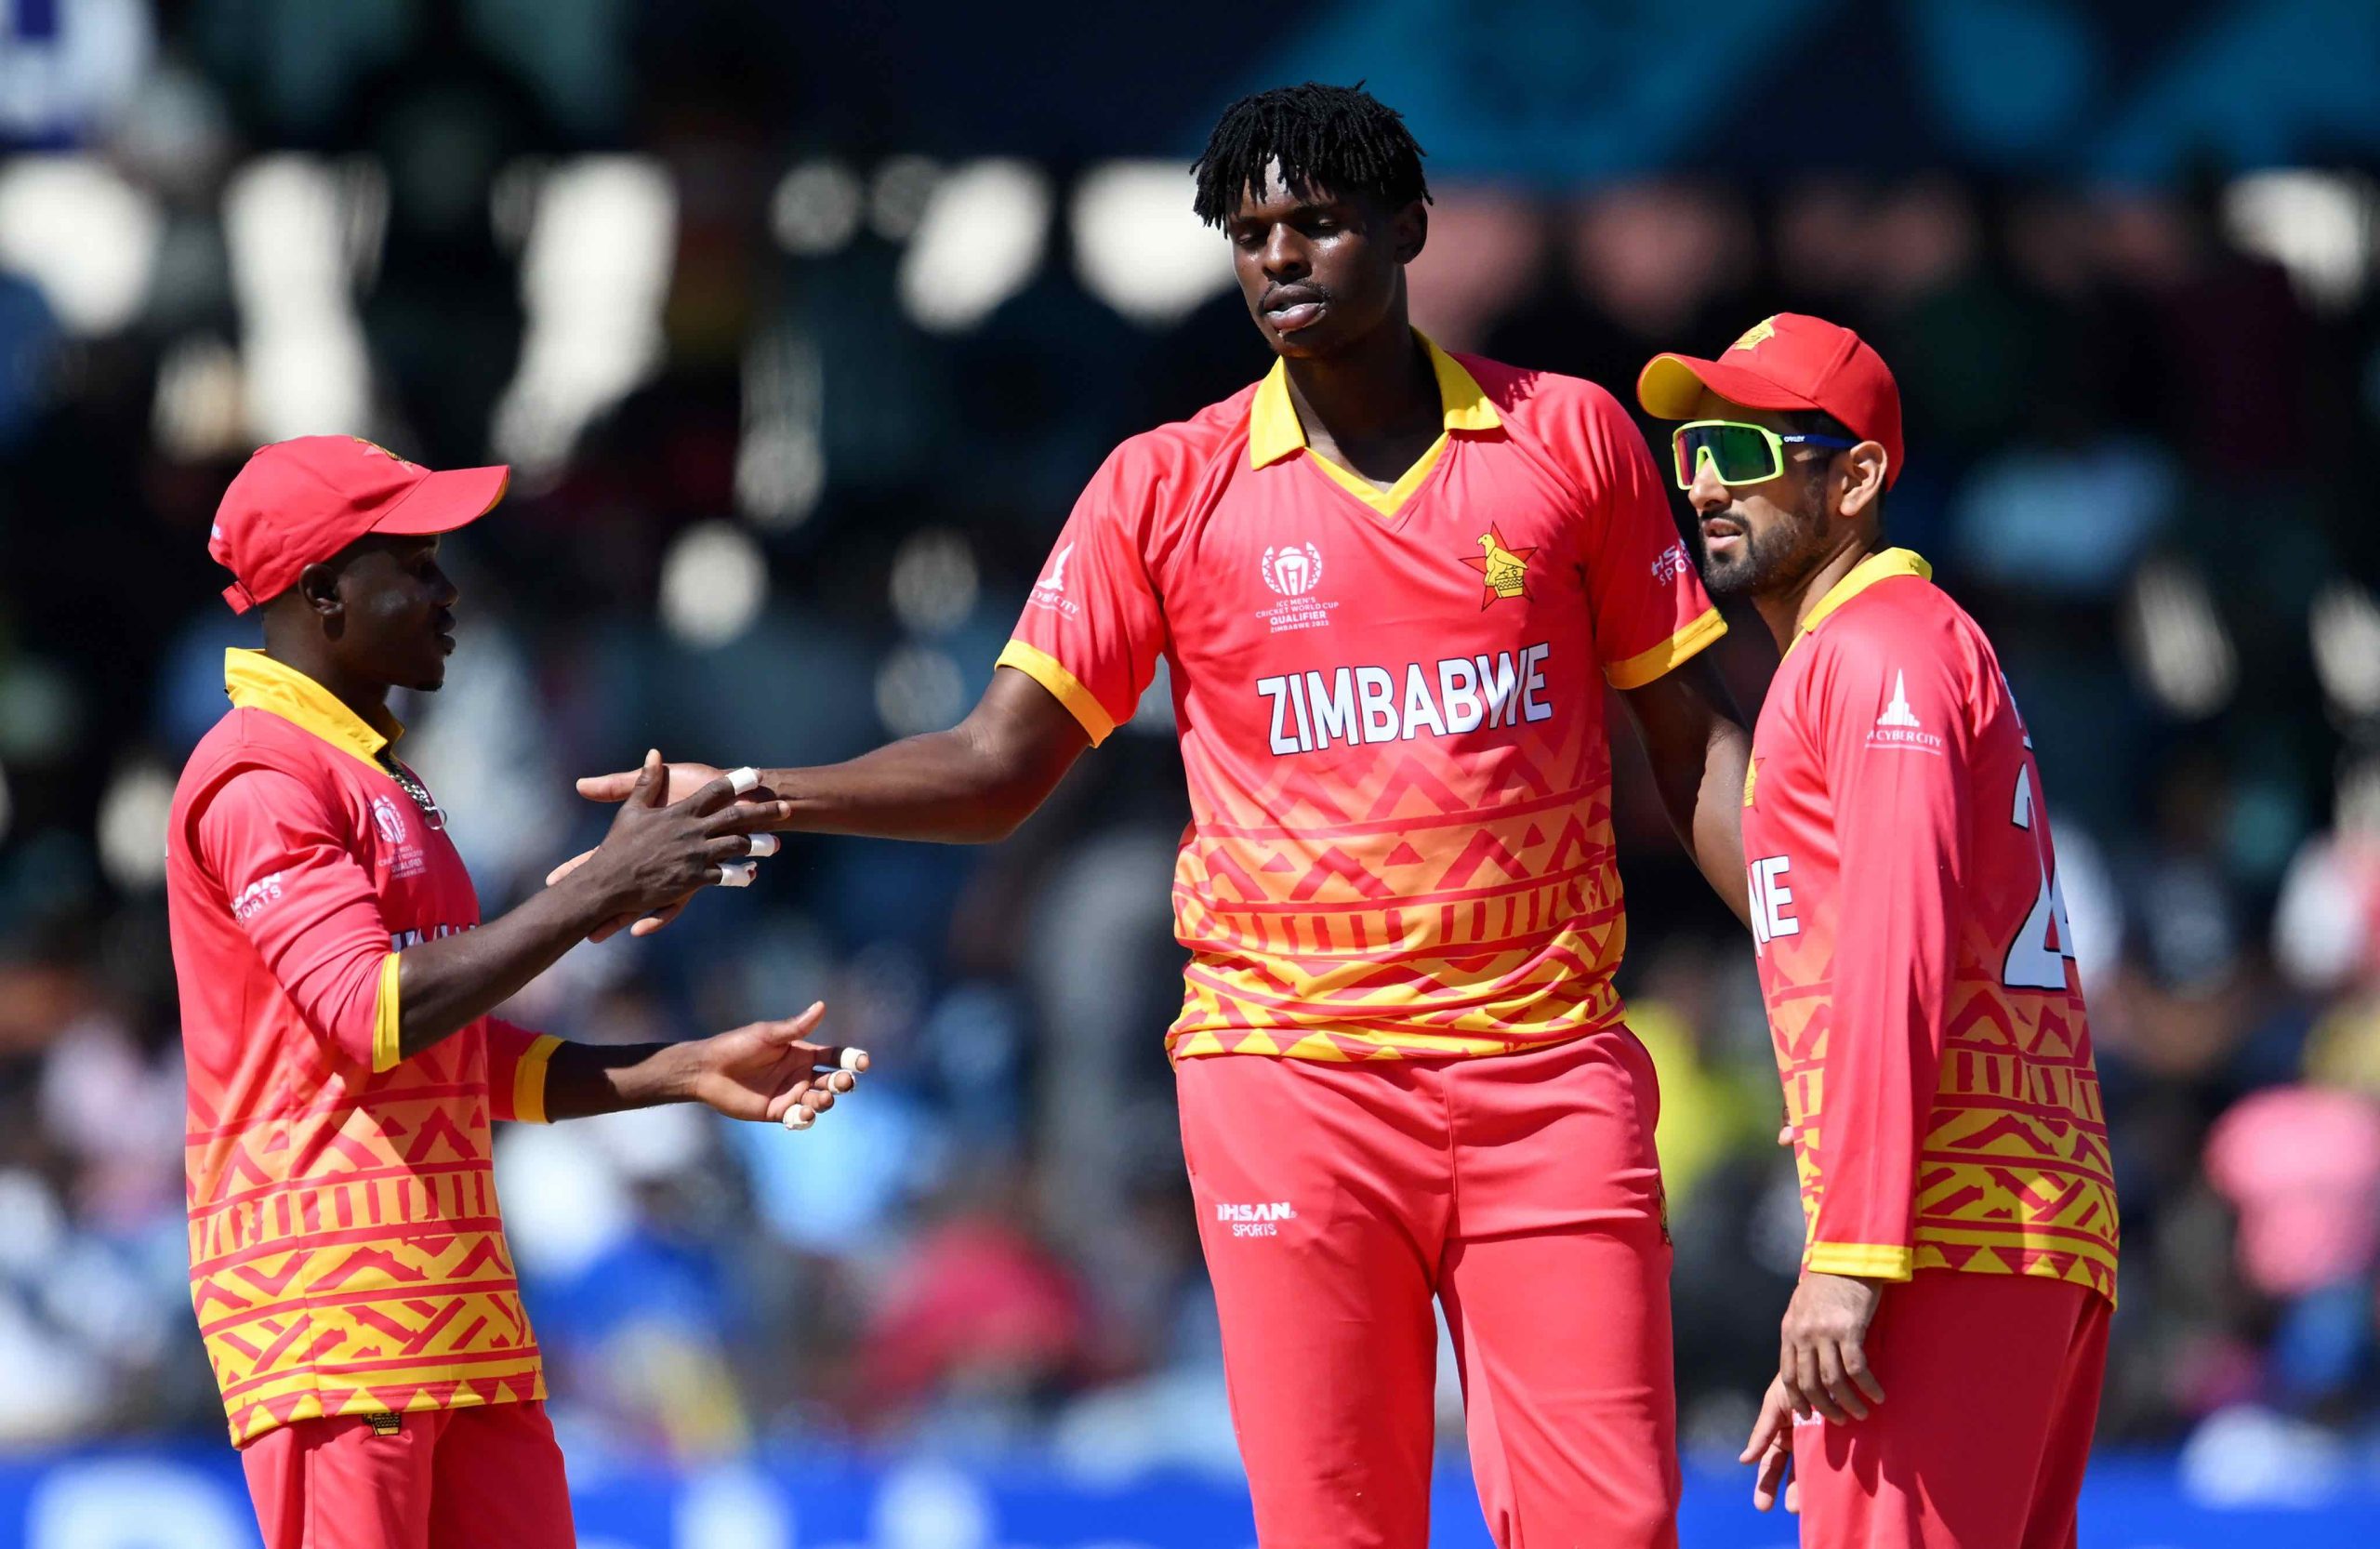 Zimbabwe and West Indies kicked off Qualifier campaigns with victories